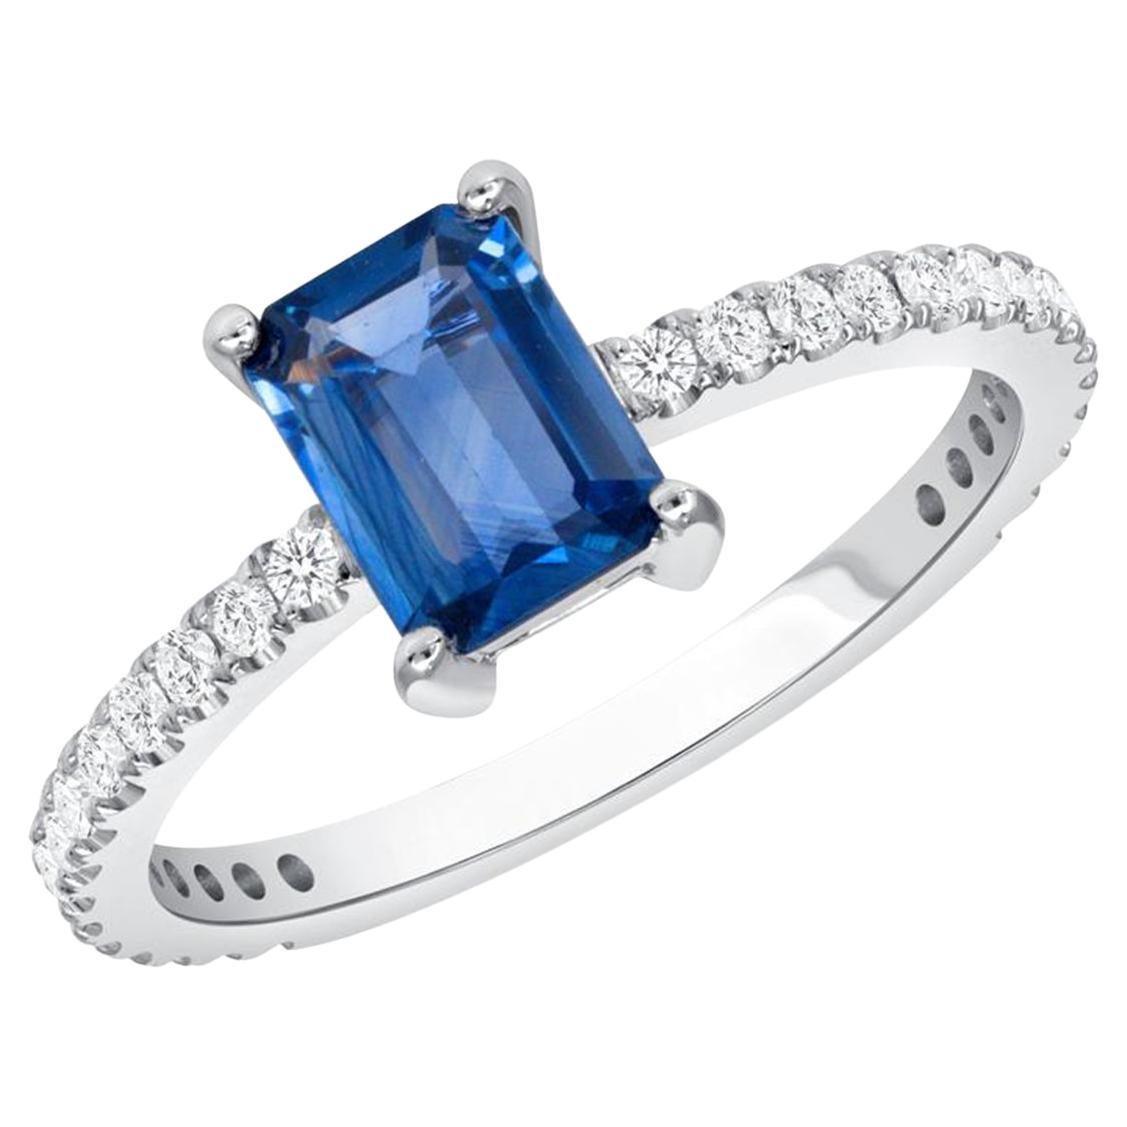 1.05 Ct Sapphire & 0.26 Ct Diamonds in 14K White Gold Engagement Ring For Sale